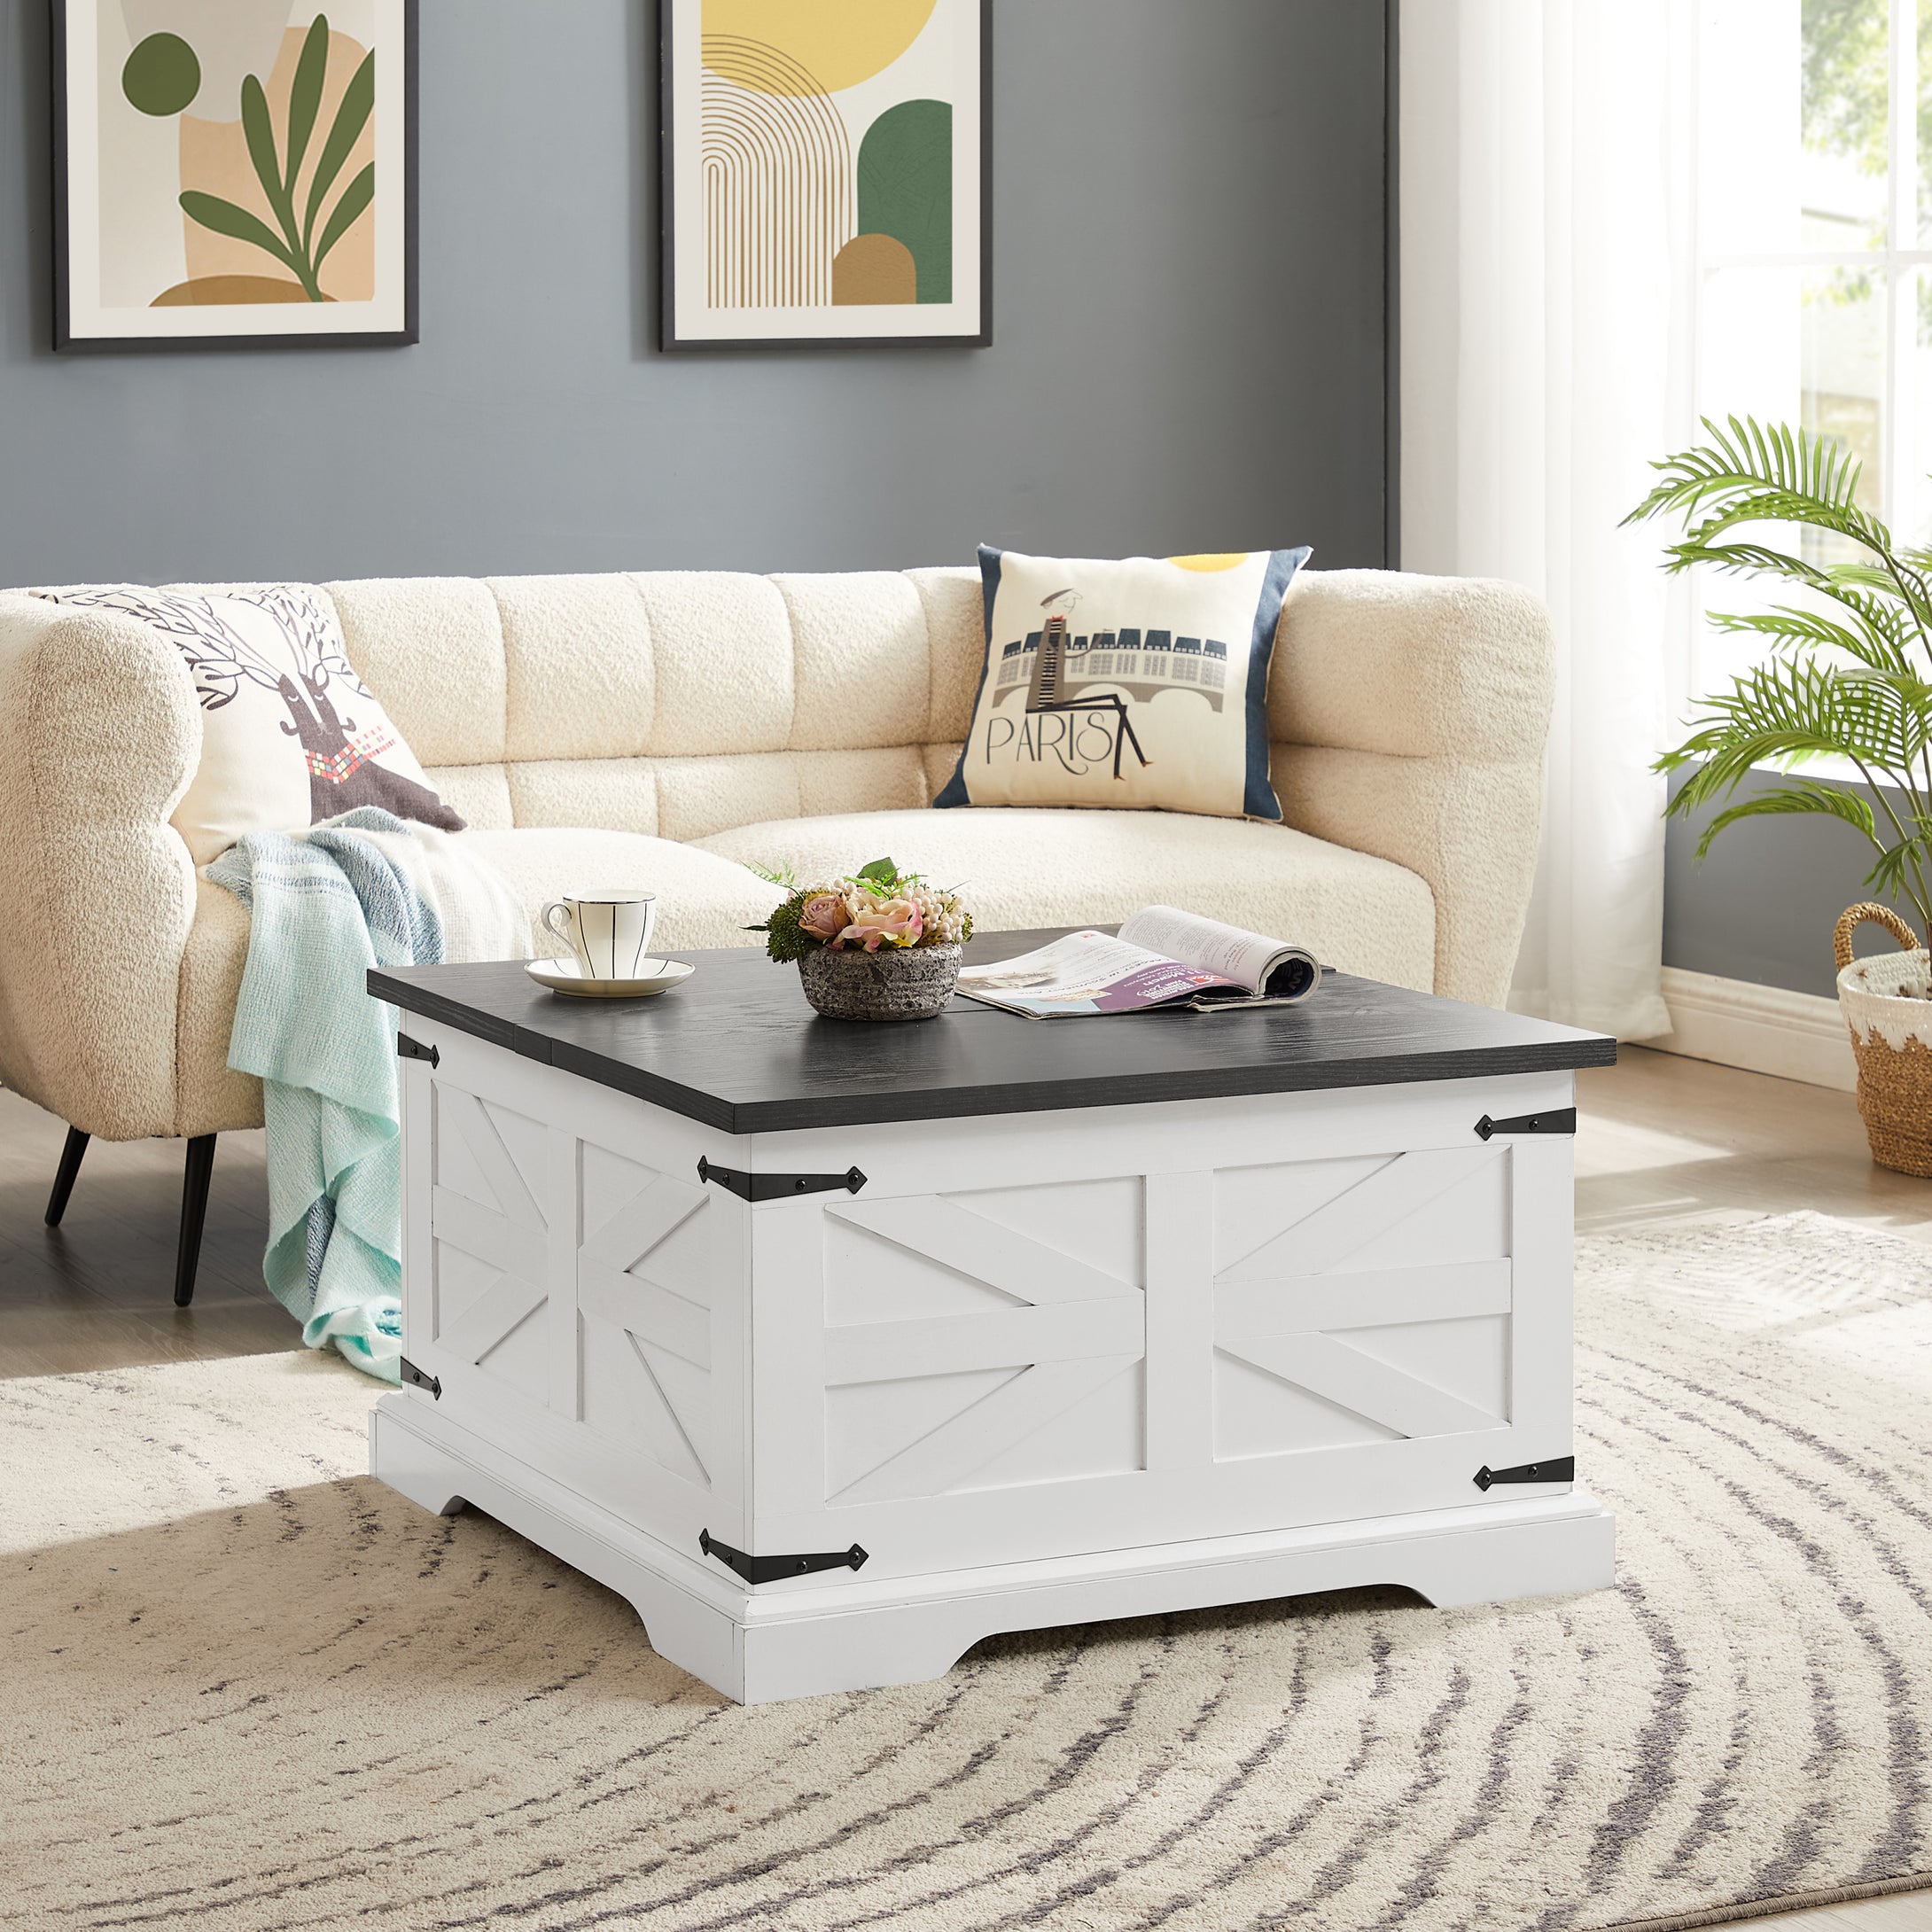 Square Wood Rustic Farmhouse Coffee Table with Large Hidden Storage Compartment and Hinged Lift Top (White)